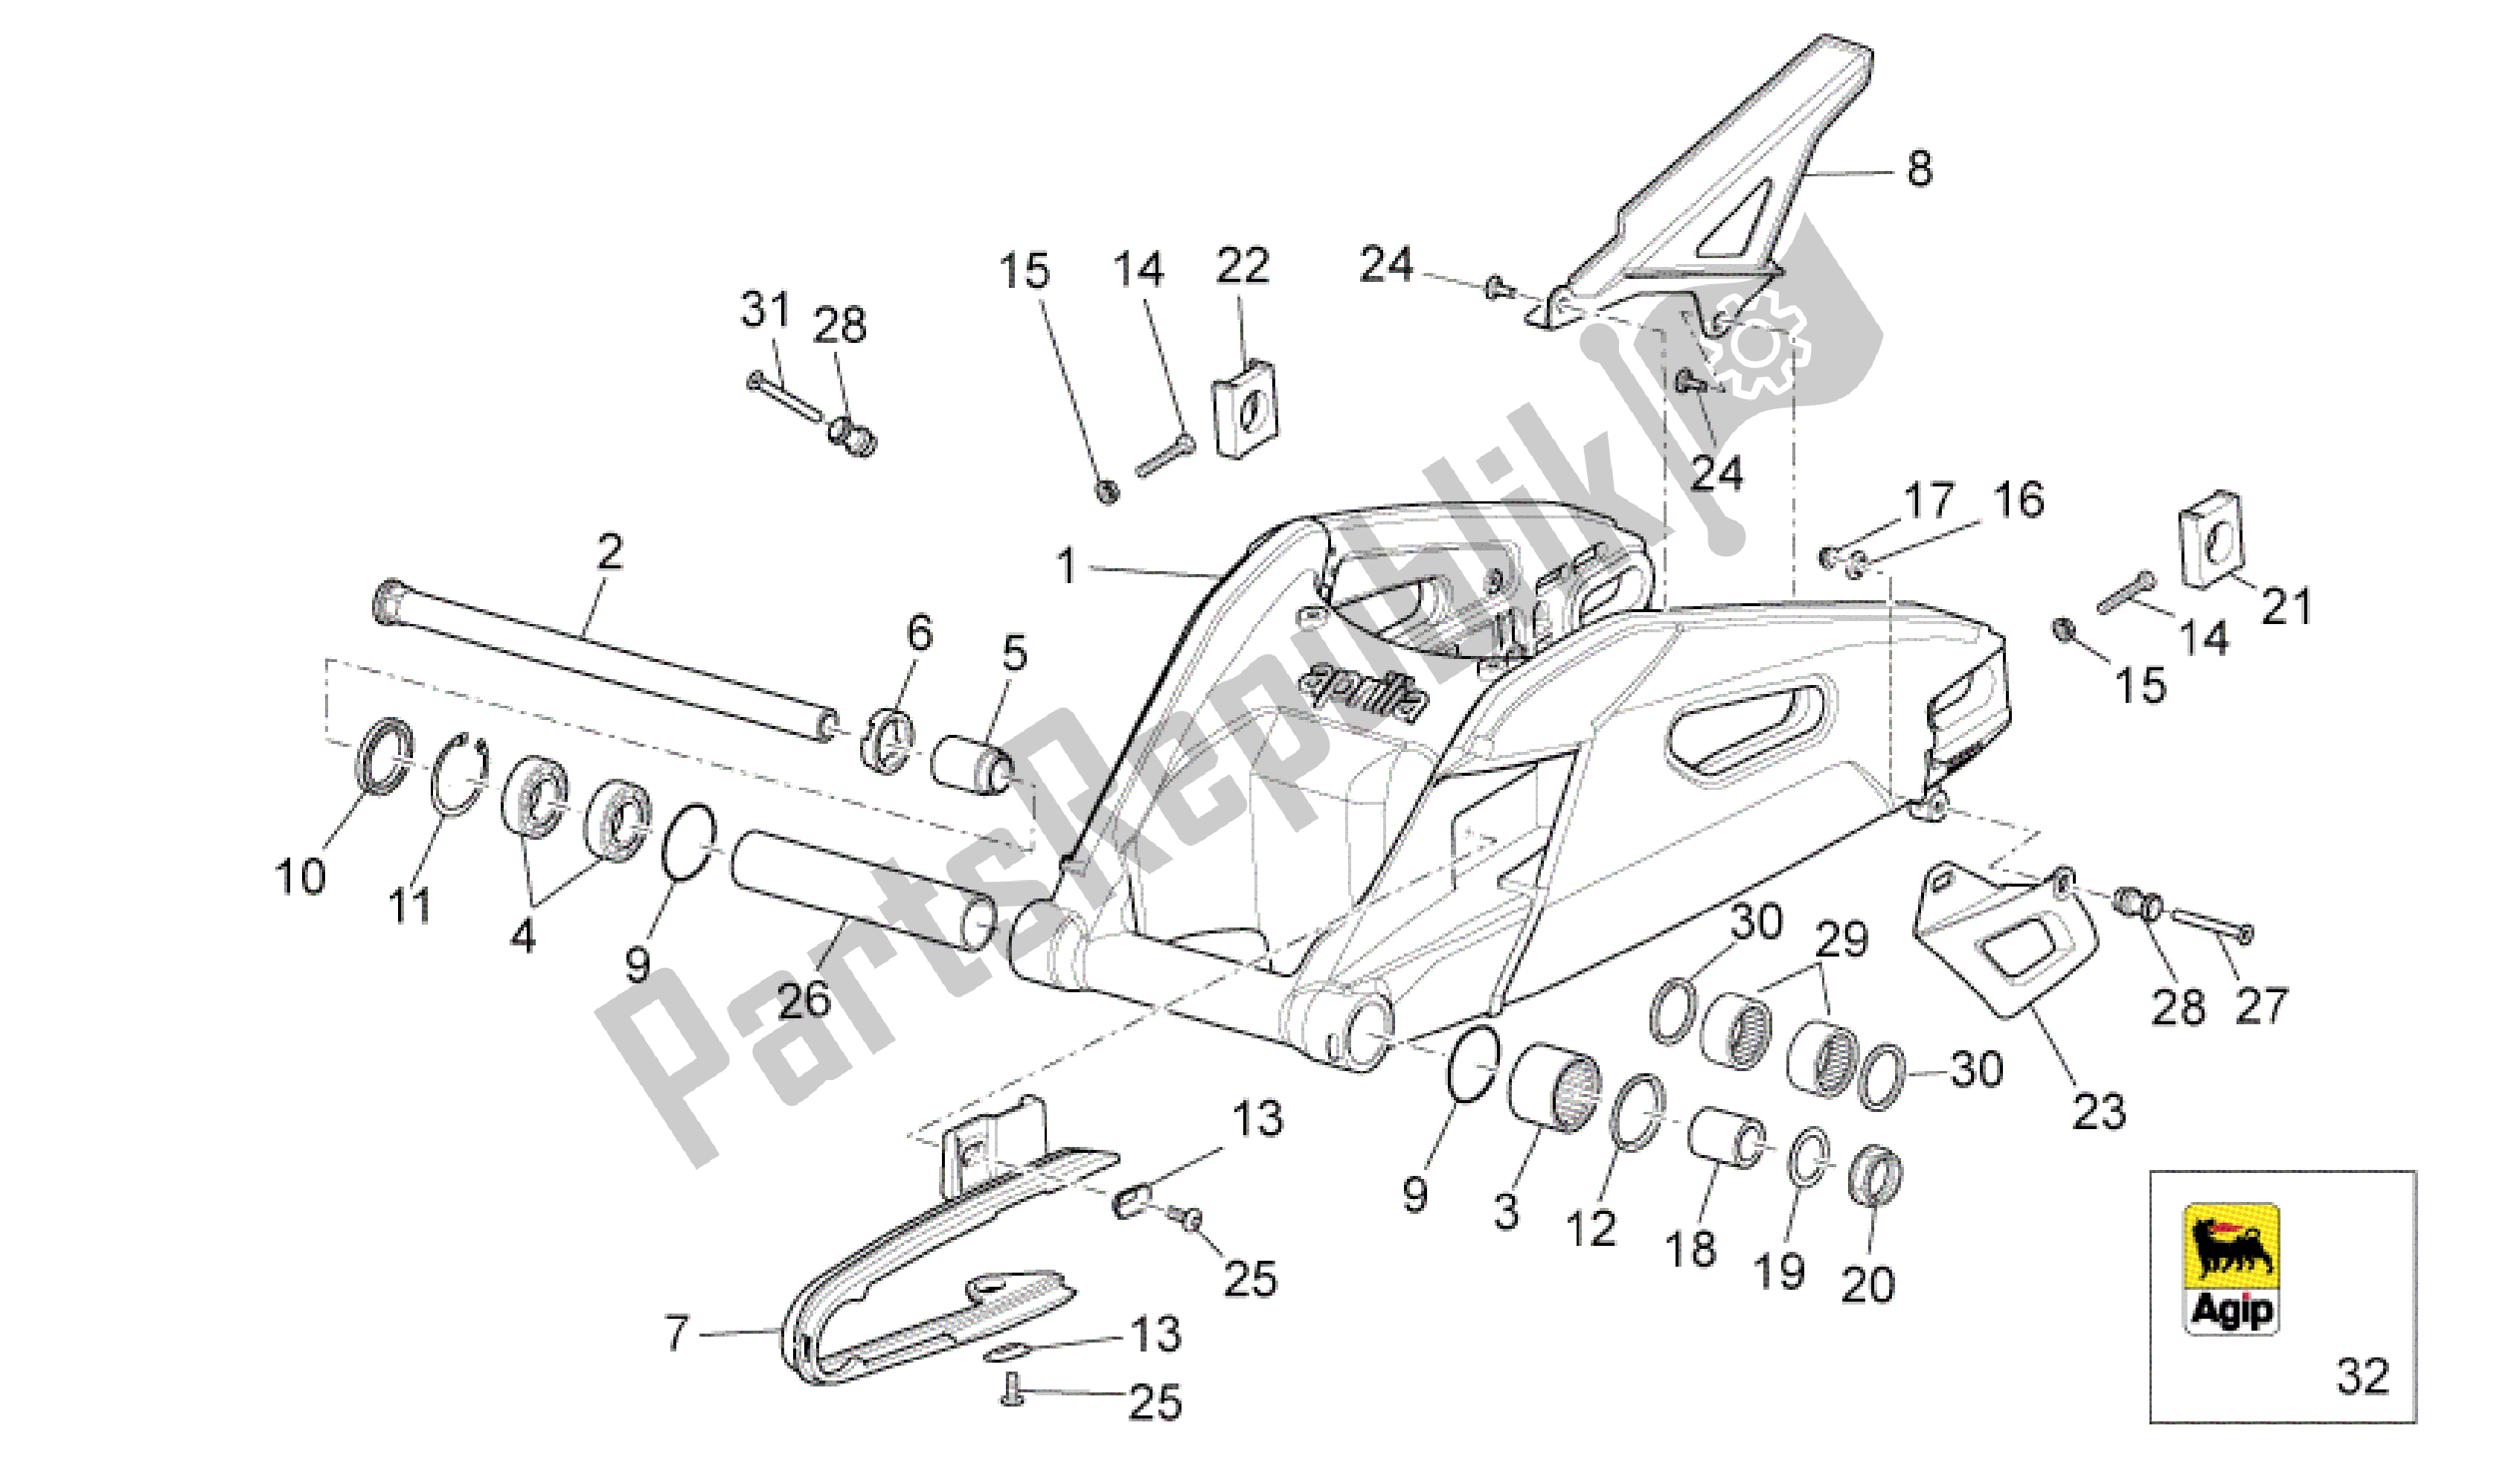 All parts for the Swing Arm of the Aprilia RSV4 Aprc Factory 3981 1000 2011 - 2012